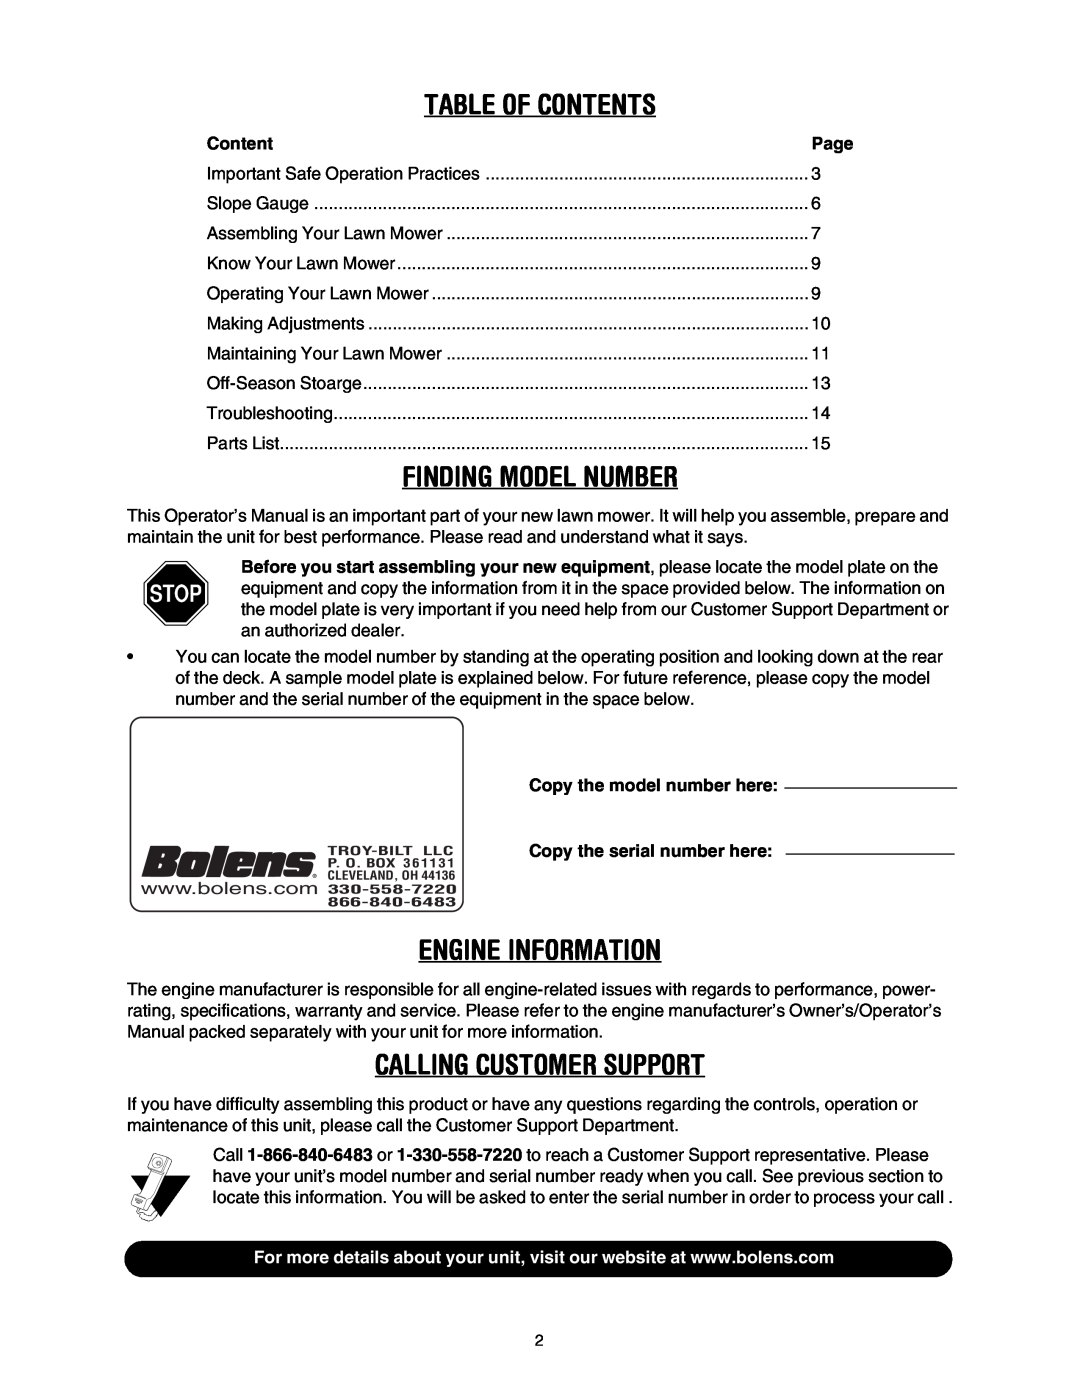 Bolens 416 manual Table Of Contents, Finding Model Number, Engine Information, Calling Customer Support 